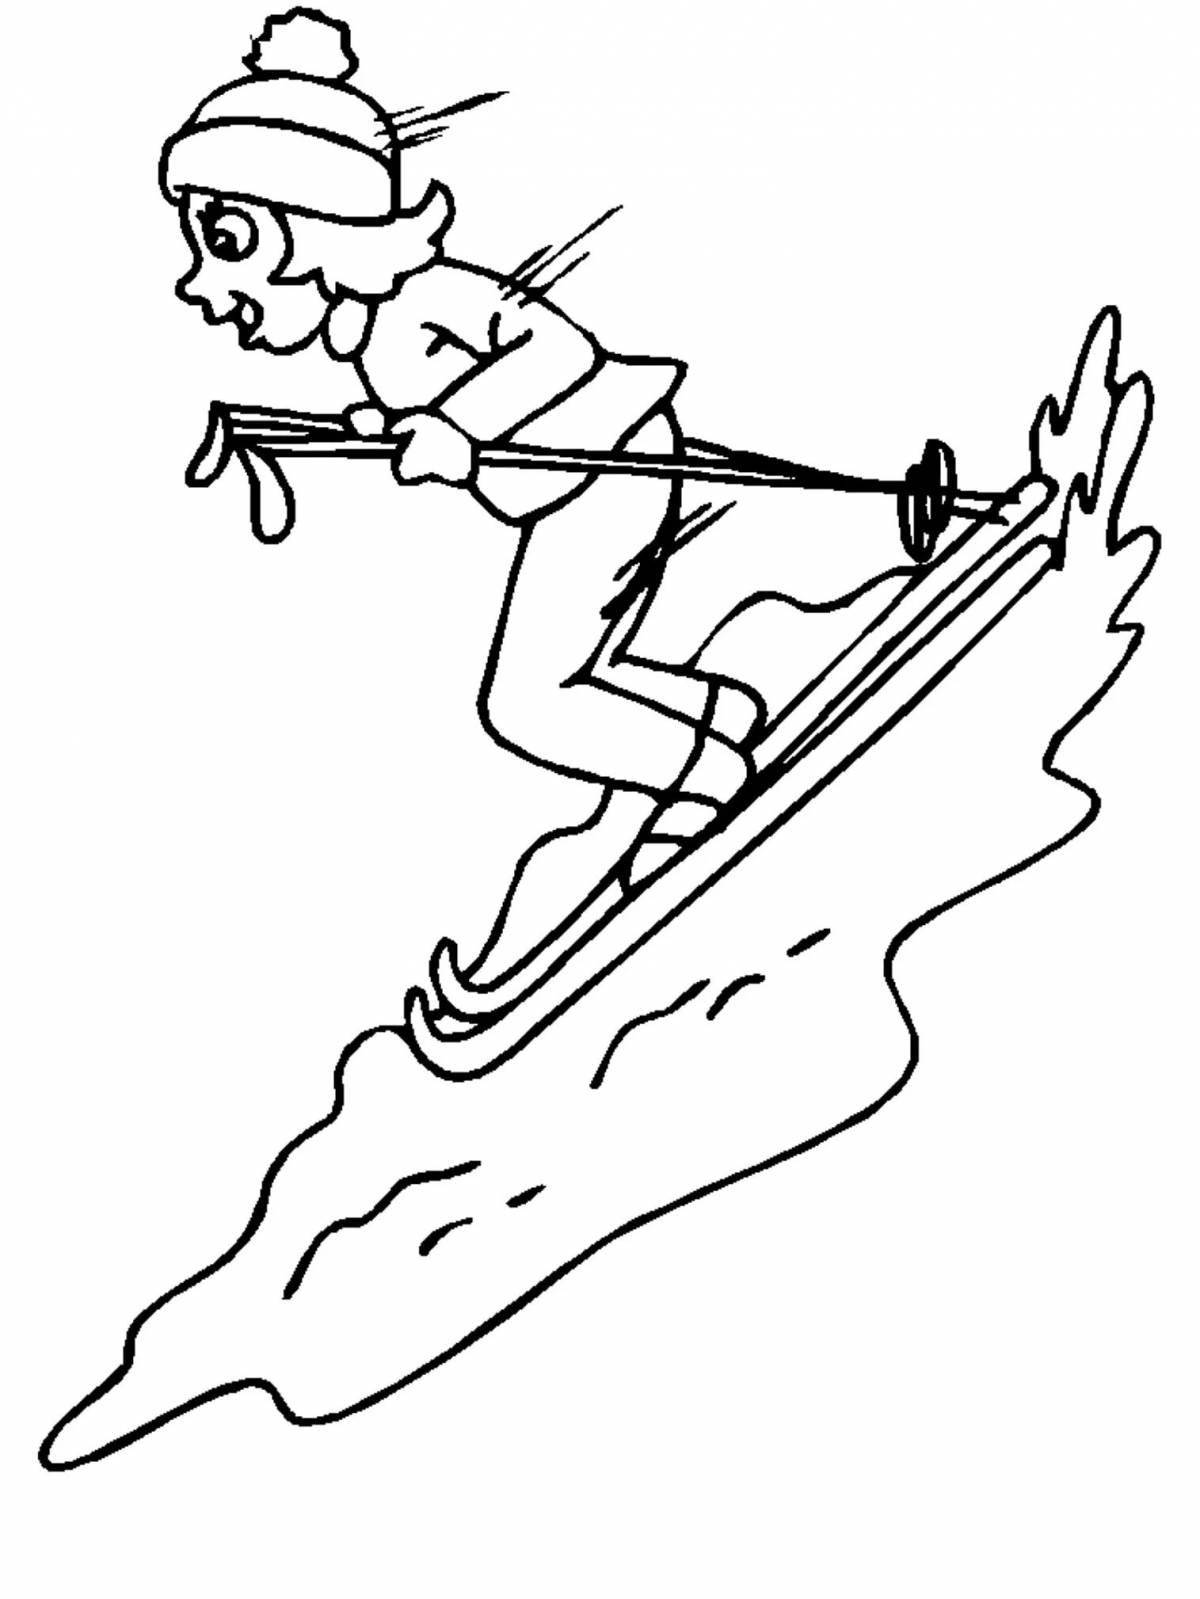 Coloring book great skiing